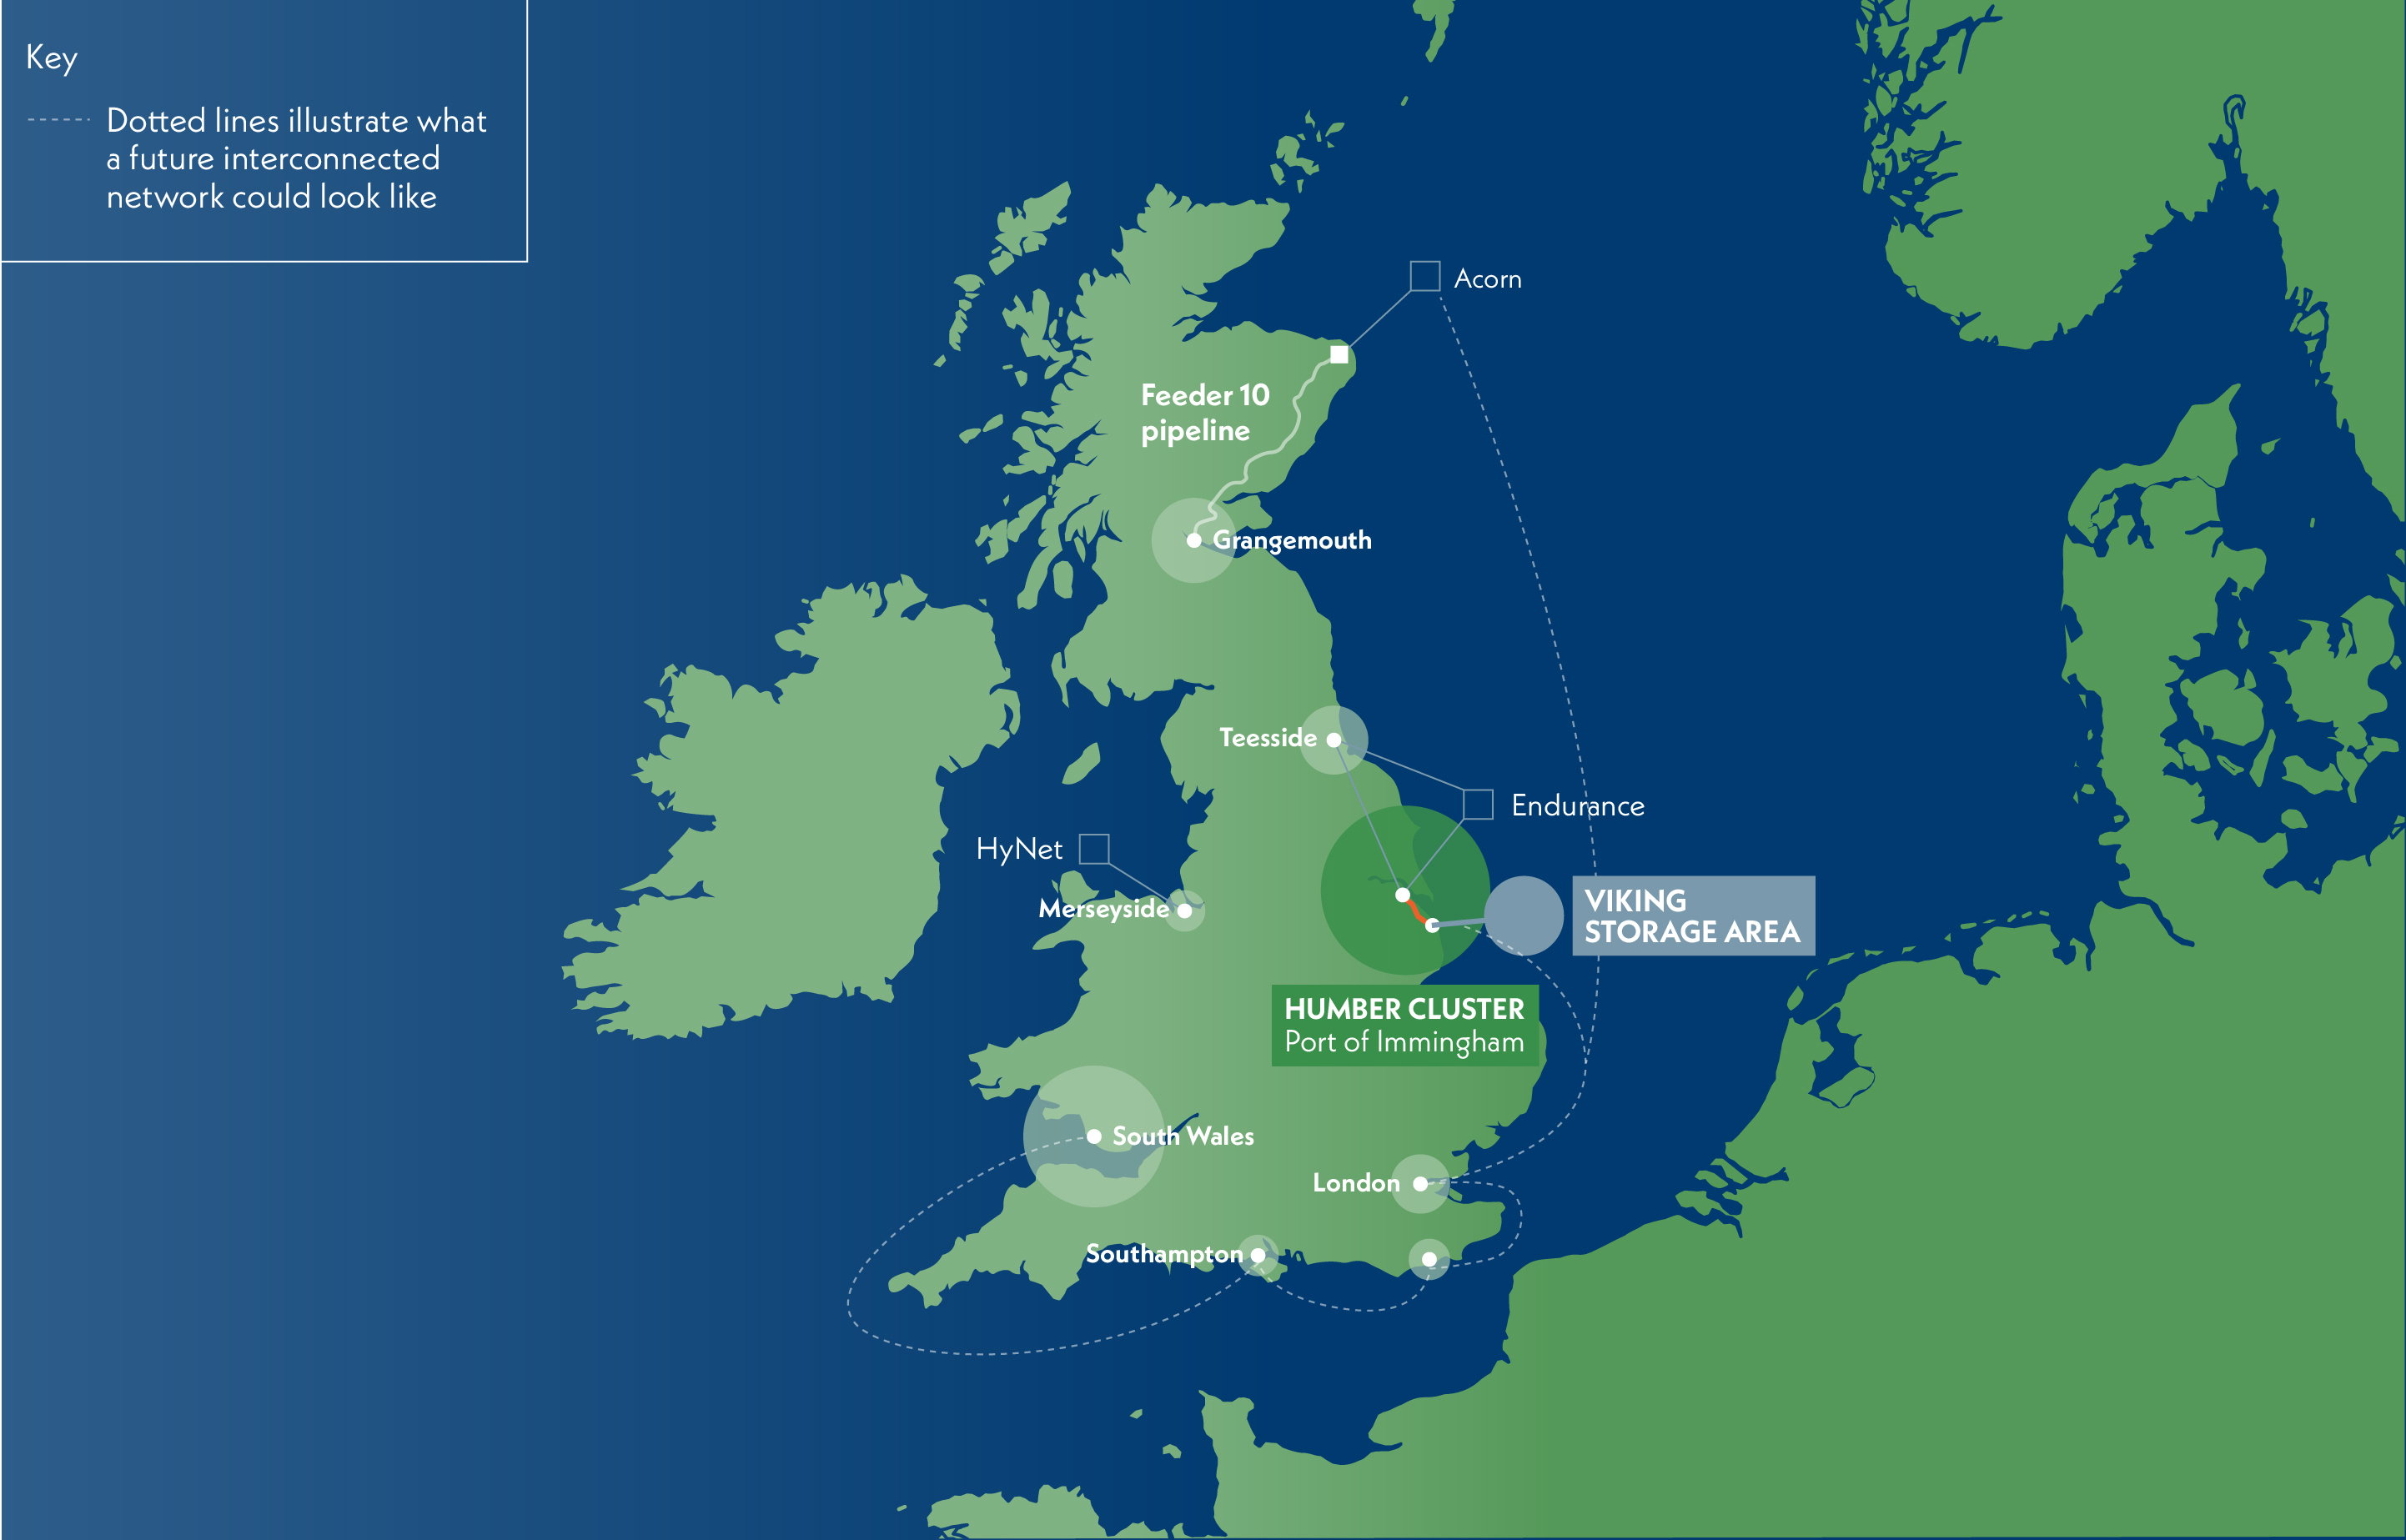 Map of the UK showing a potential future carbon capture network connecting various industrial clusters around the country.